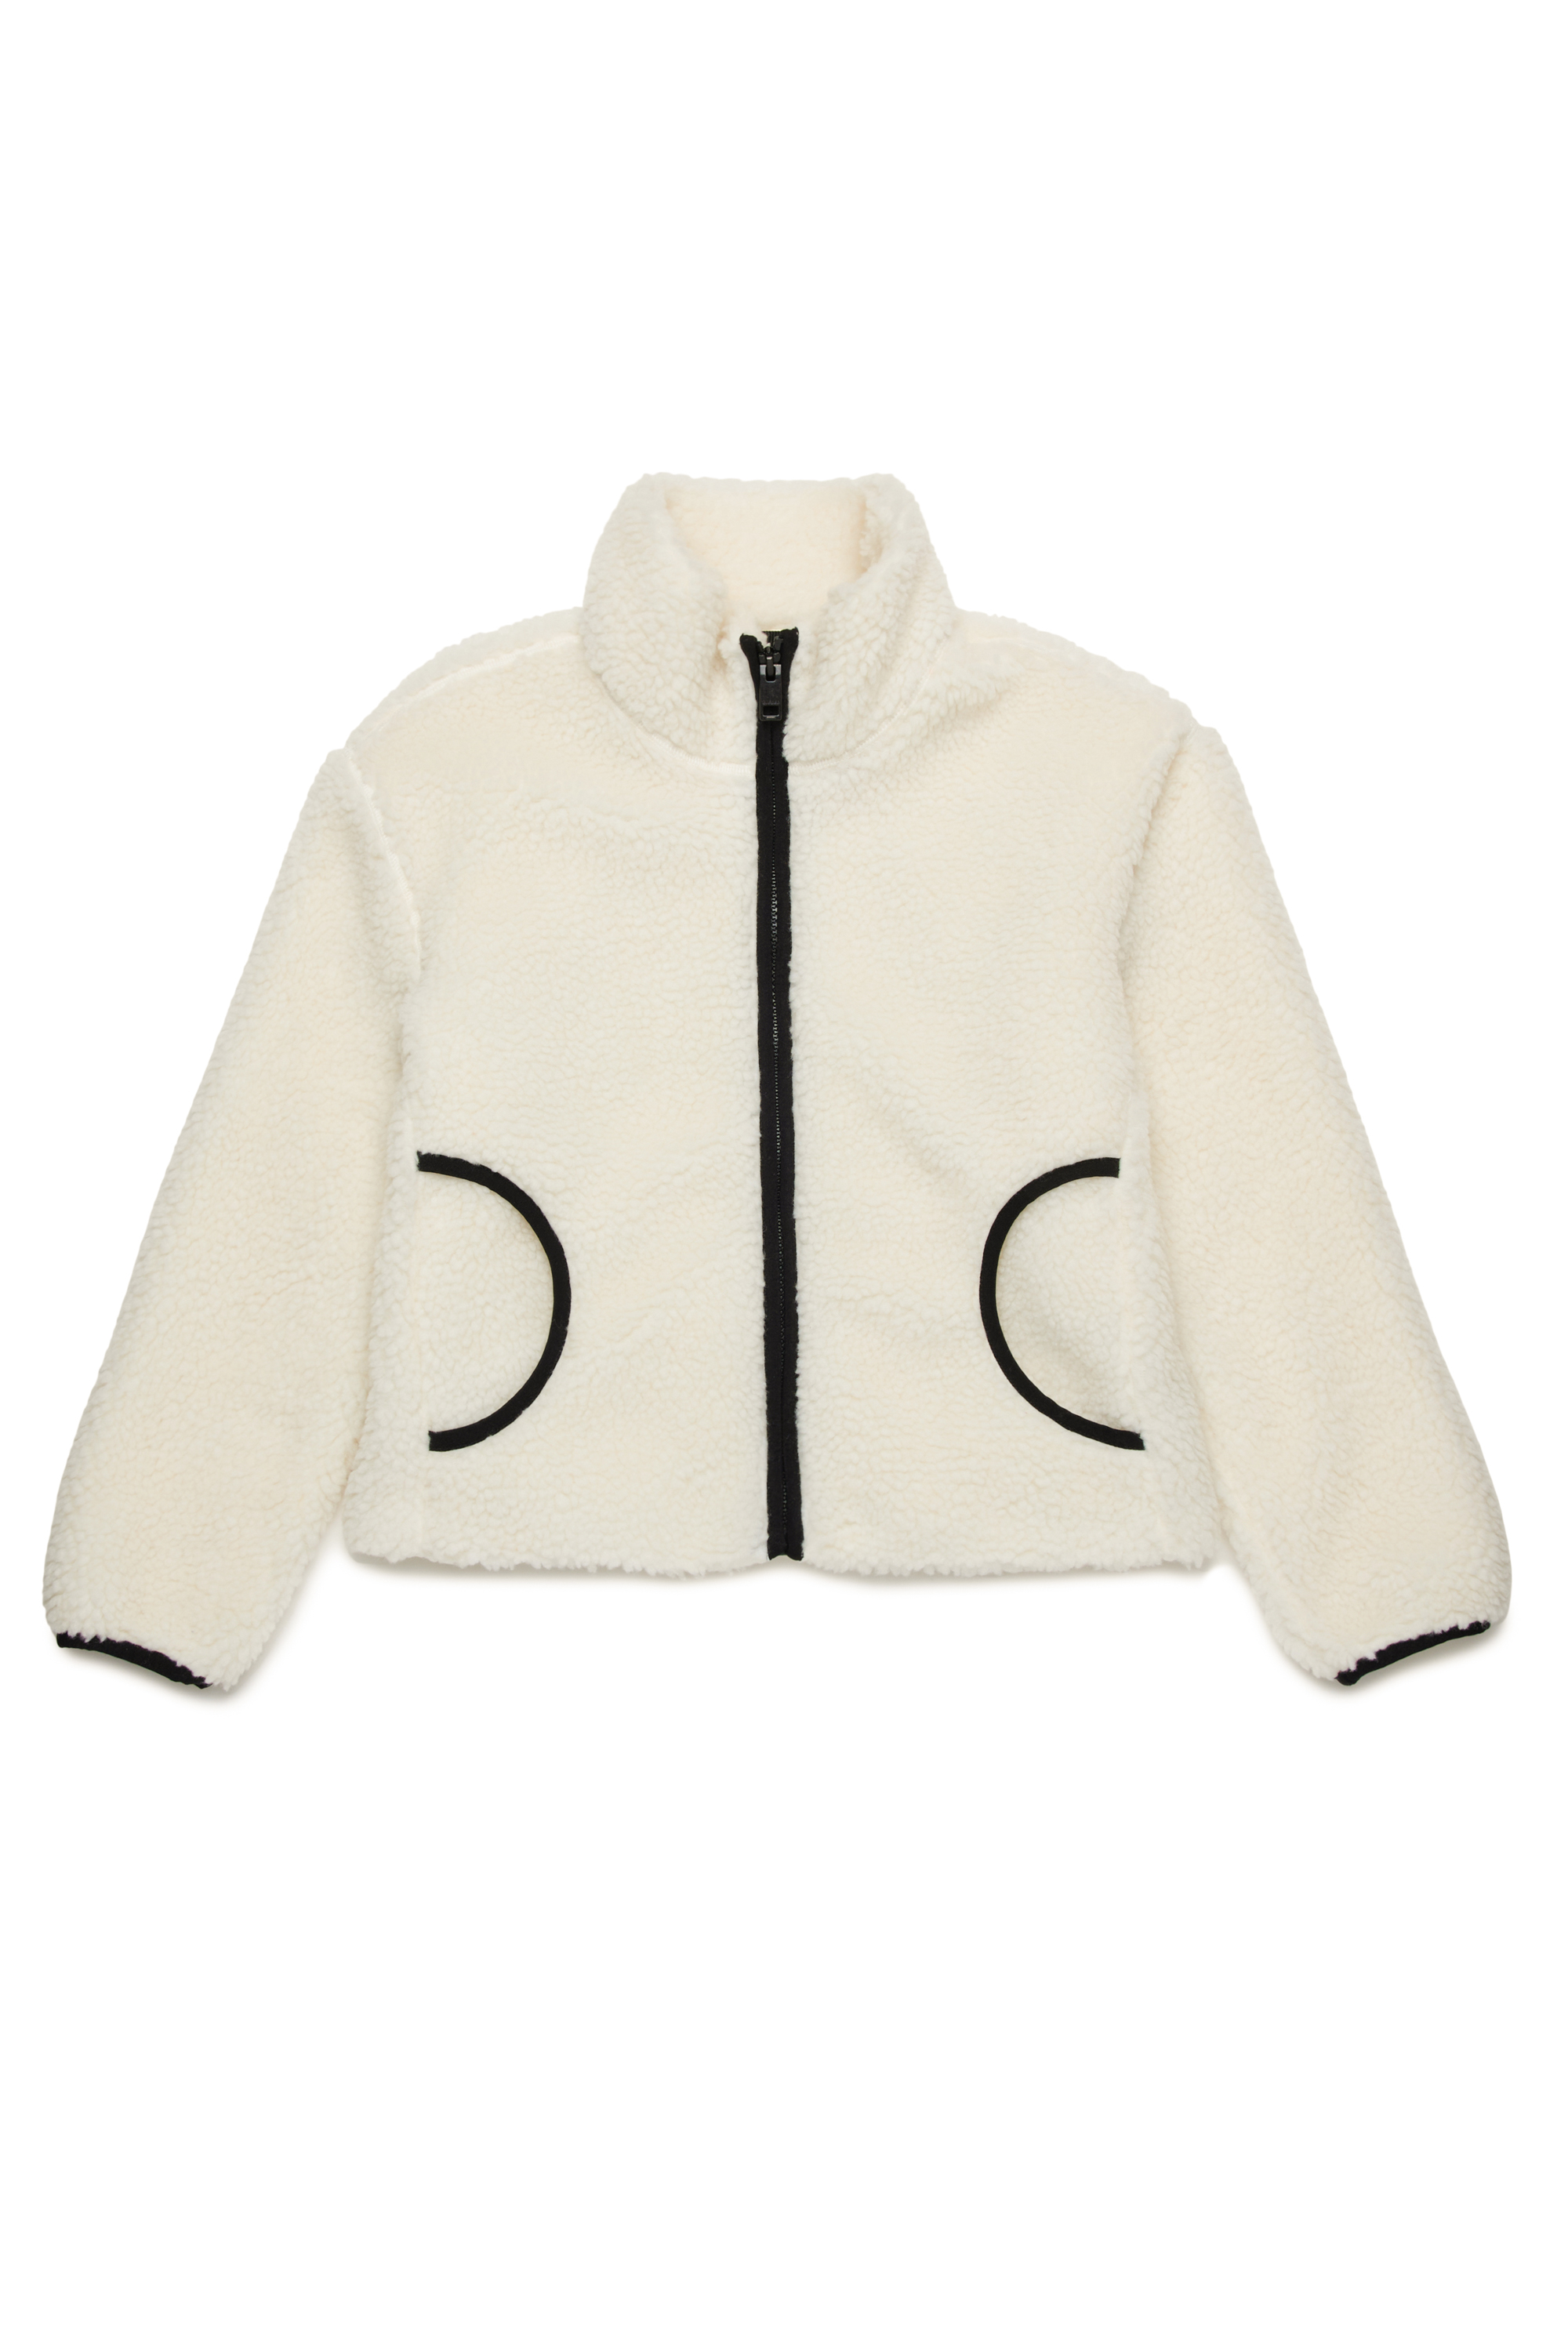 Diesel - JFCHIBI, Woman Teddy jacket with Oval D logo in White - Image 1